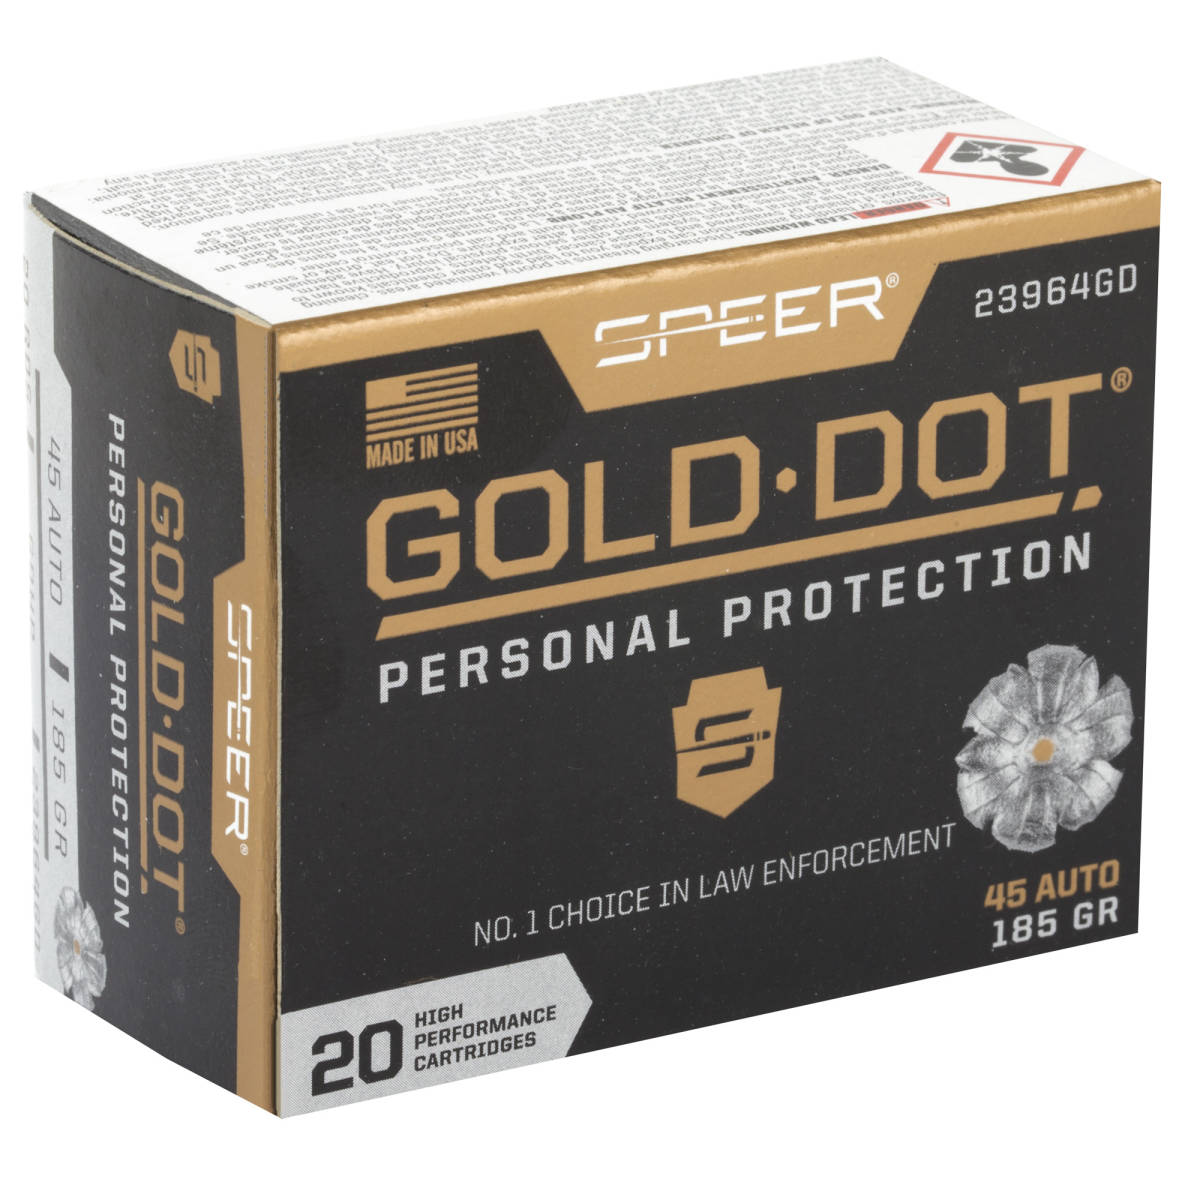 Speer 23964GD Gold Dot Personal Protection 45 ACP 185 gr Hollow Point 20-img-1